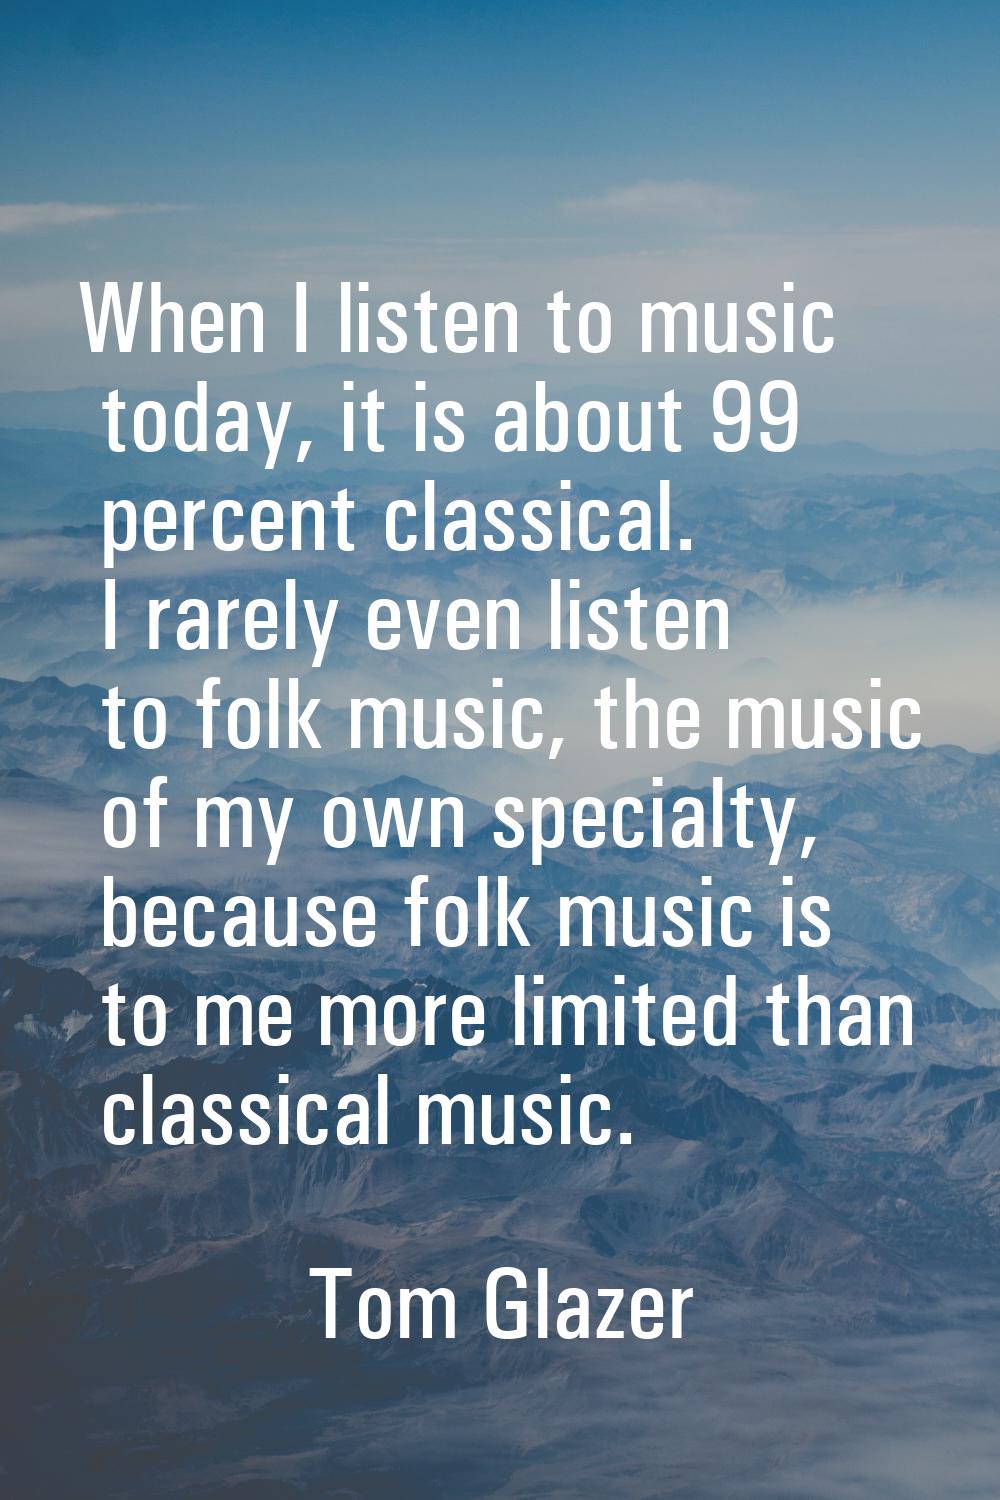 When I listen to music today, it is about 99 percent classical. I rarely even listen to folk music,